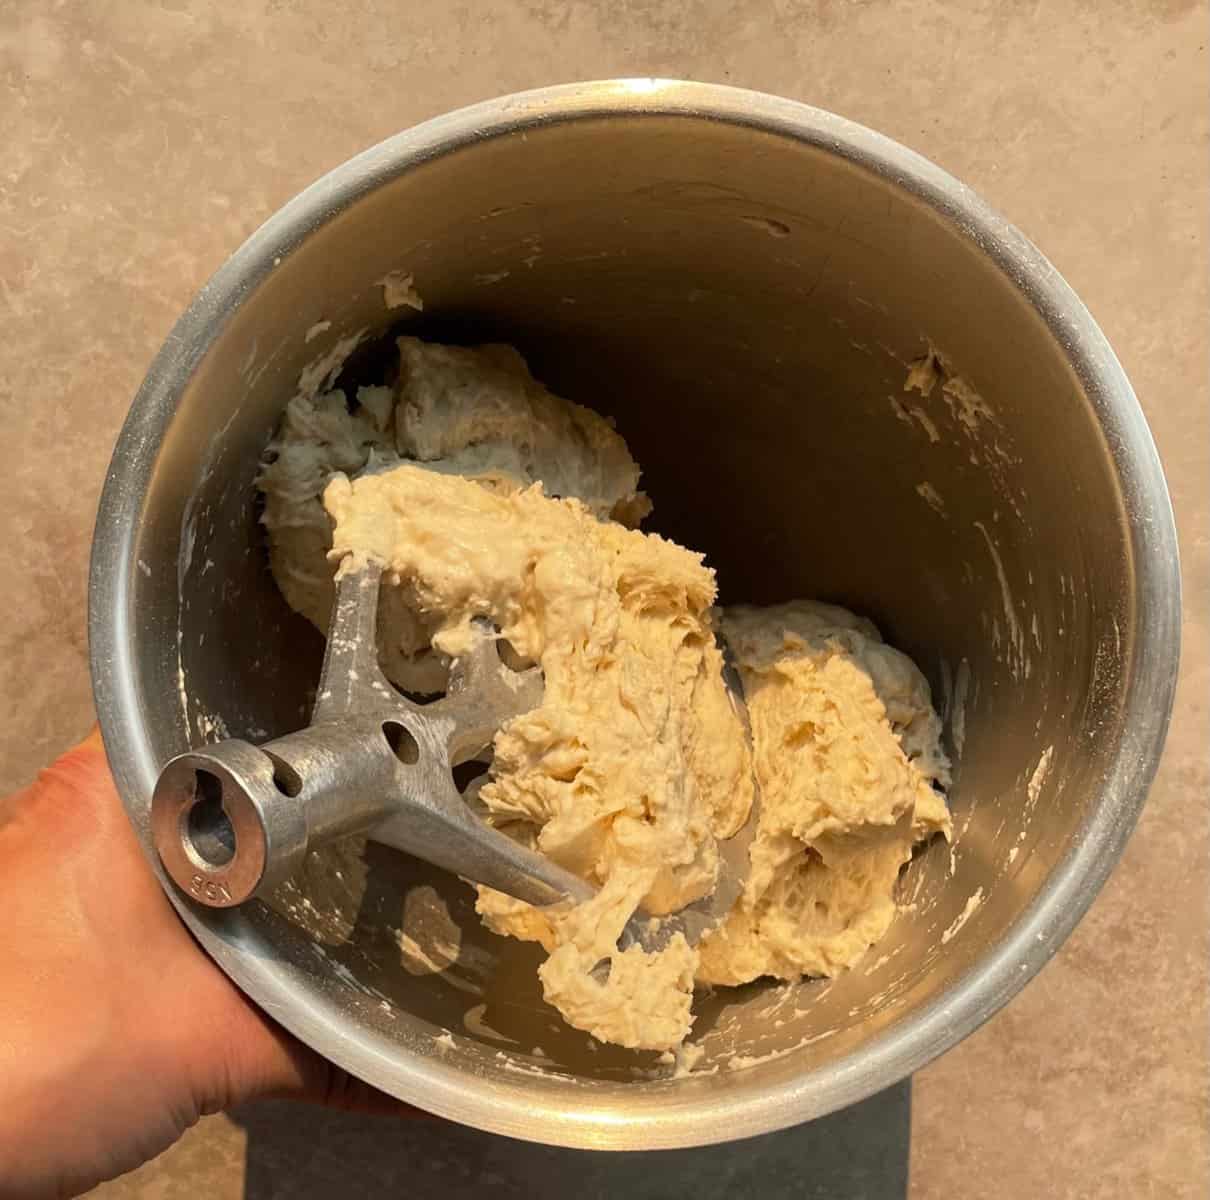 partially mixed ooni pizza dough in a mixing bowl and paddle.